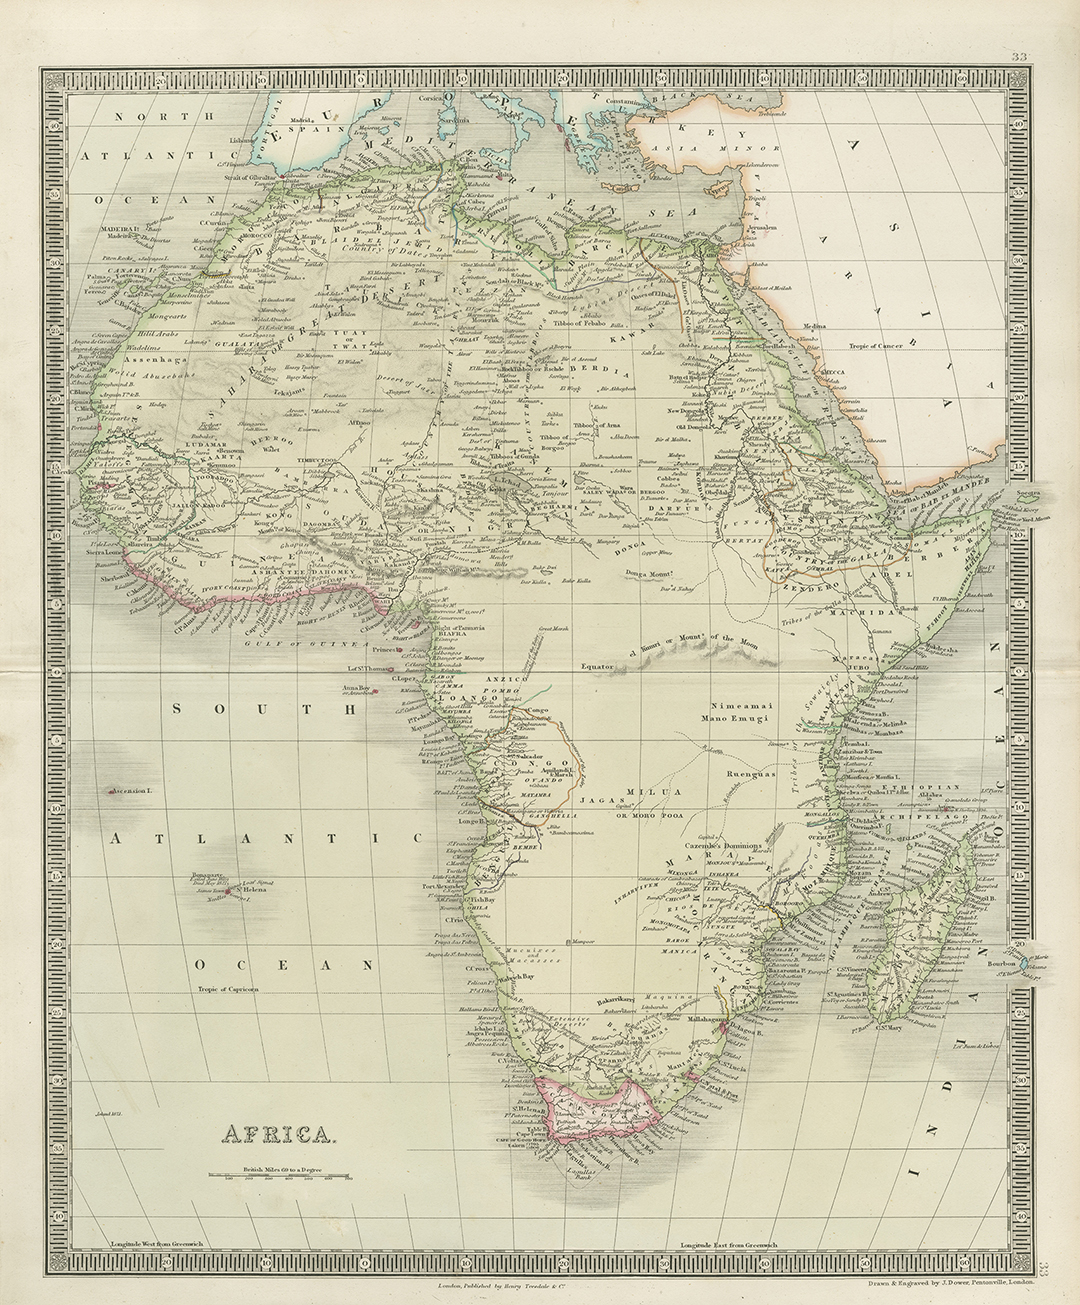 Uncolored map of Africa, with original hand colored outlines, engraved by John Dower and published by Henry Teesdale & Co. of London, ca. 1844.